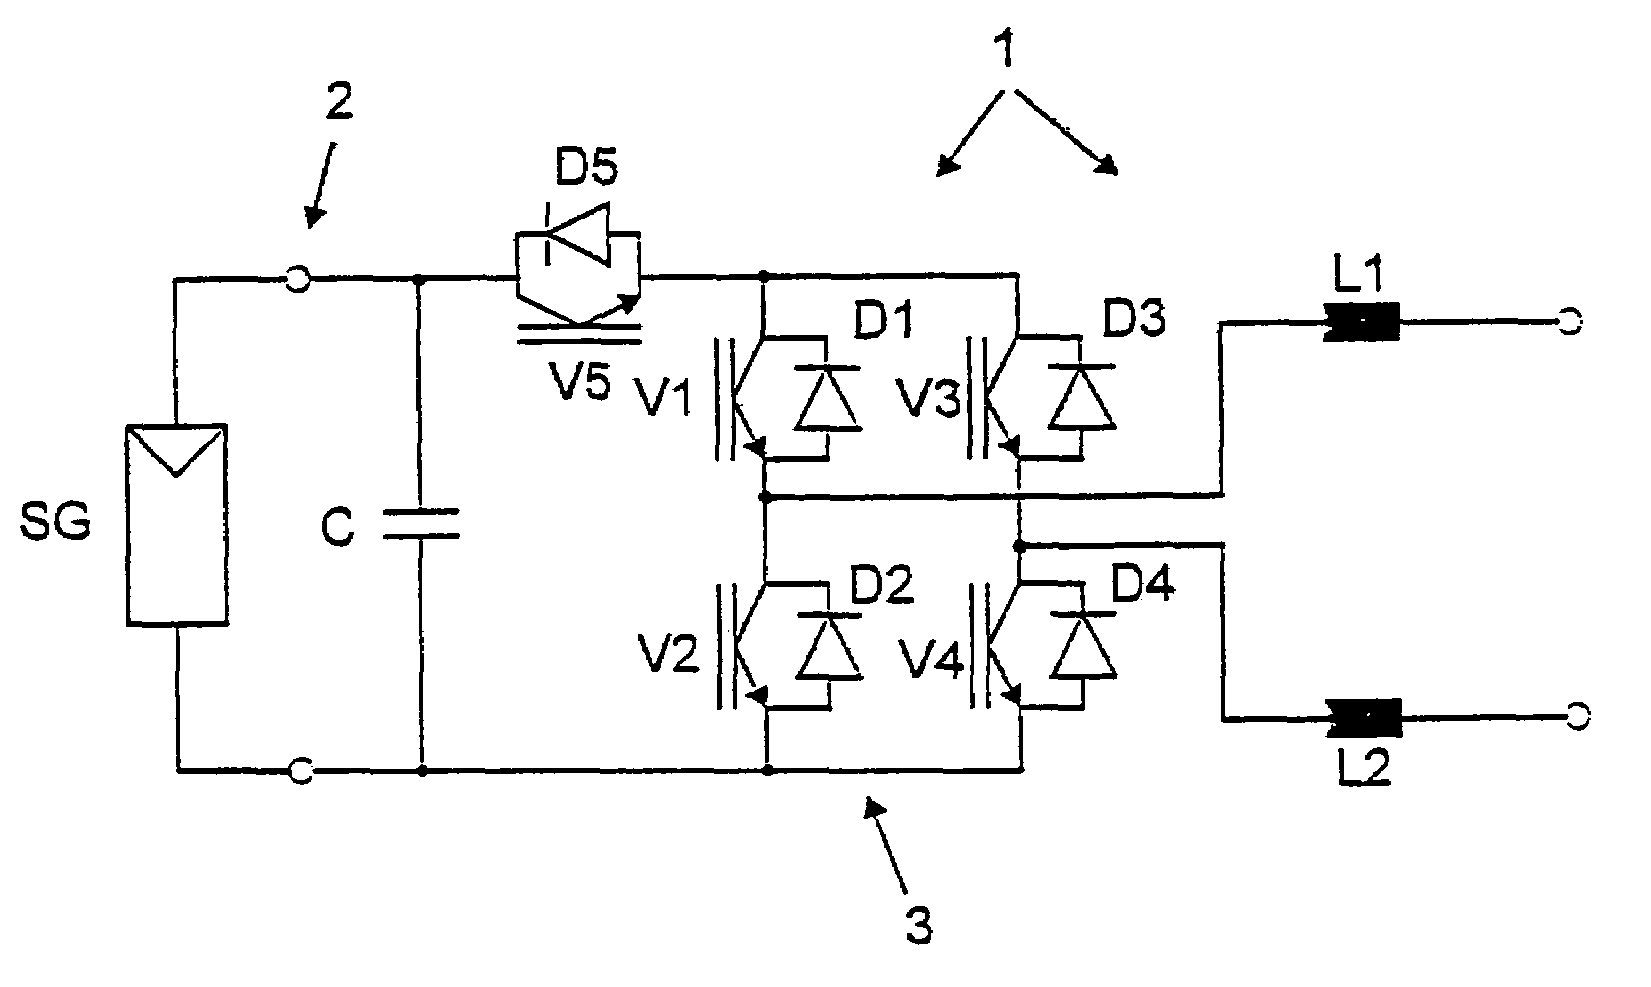 Method of converting a direct current voltage from a source of direct current voltage, more specifically from a photovoltaic source of direct current voltage, into a alternating current voltage